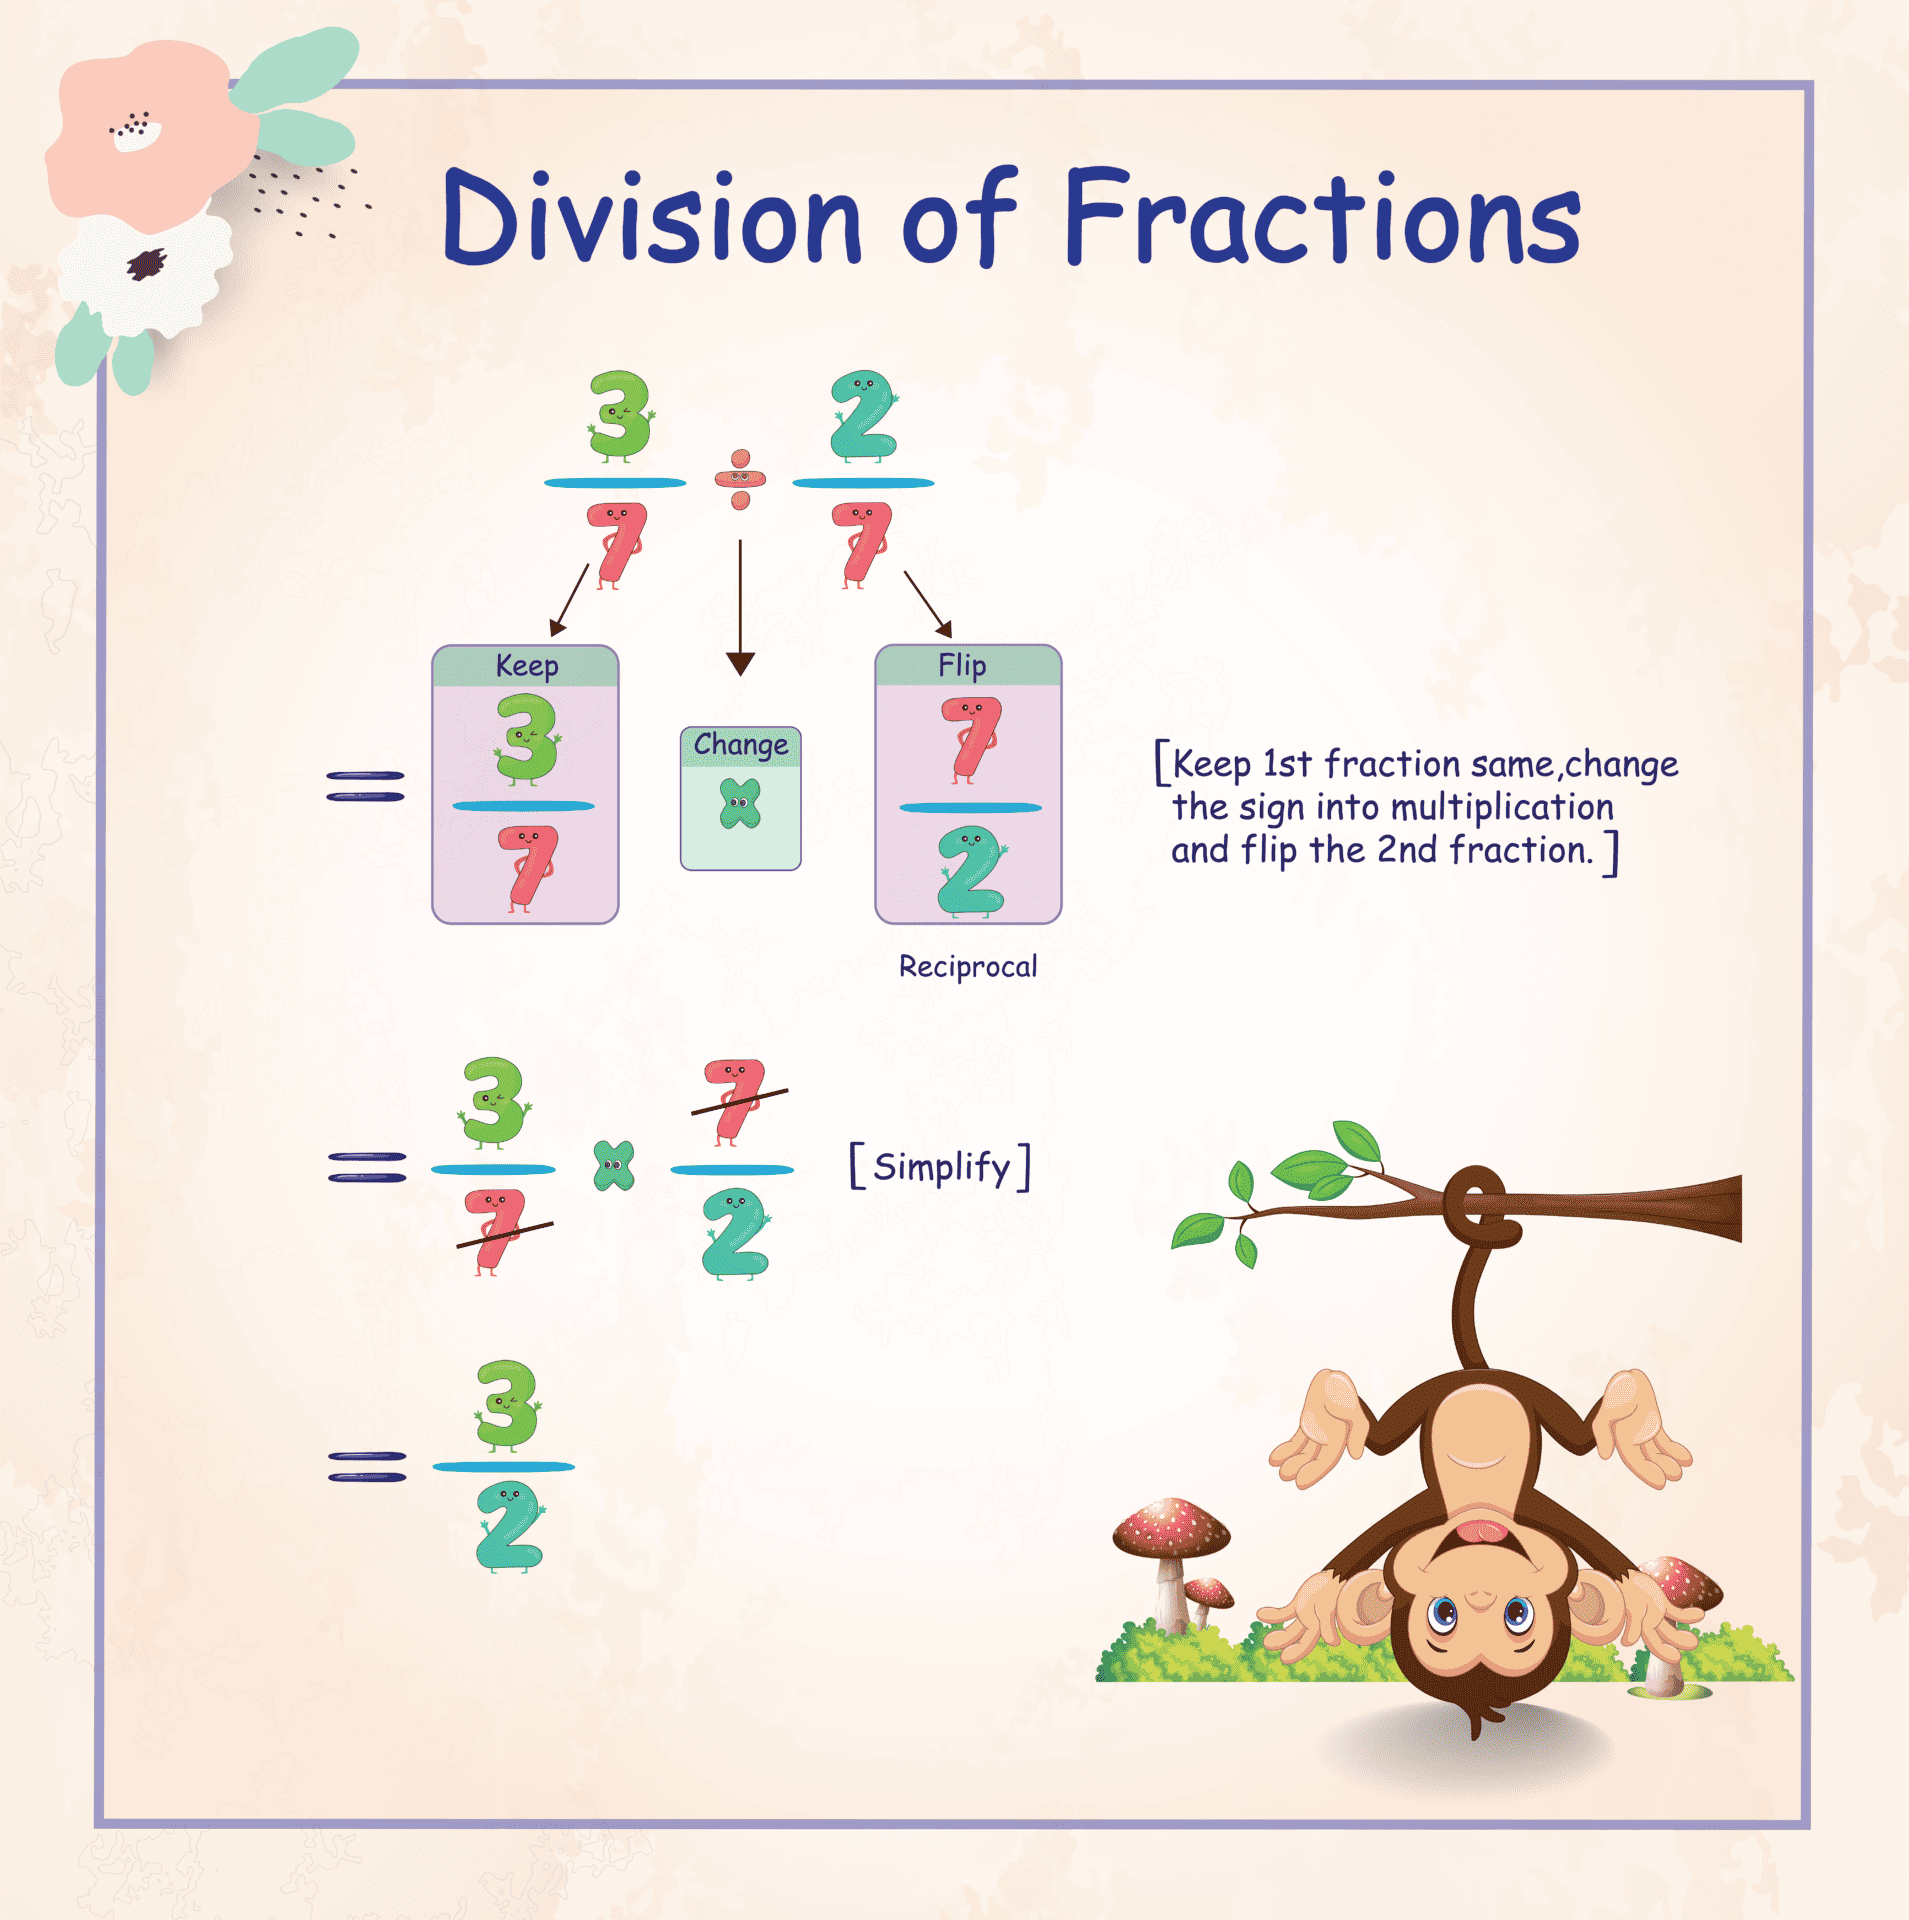 Division of fractions process